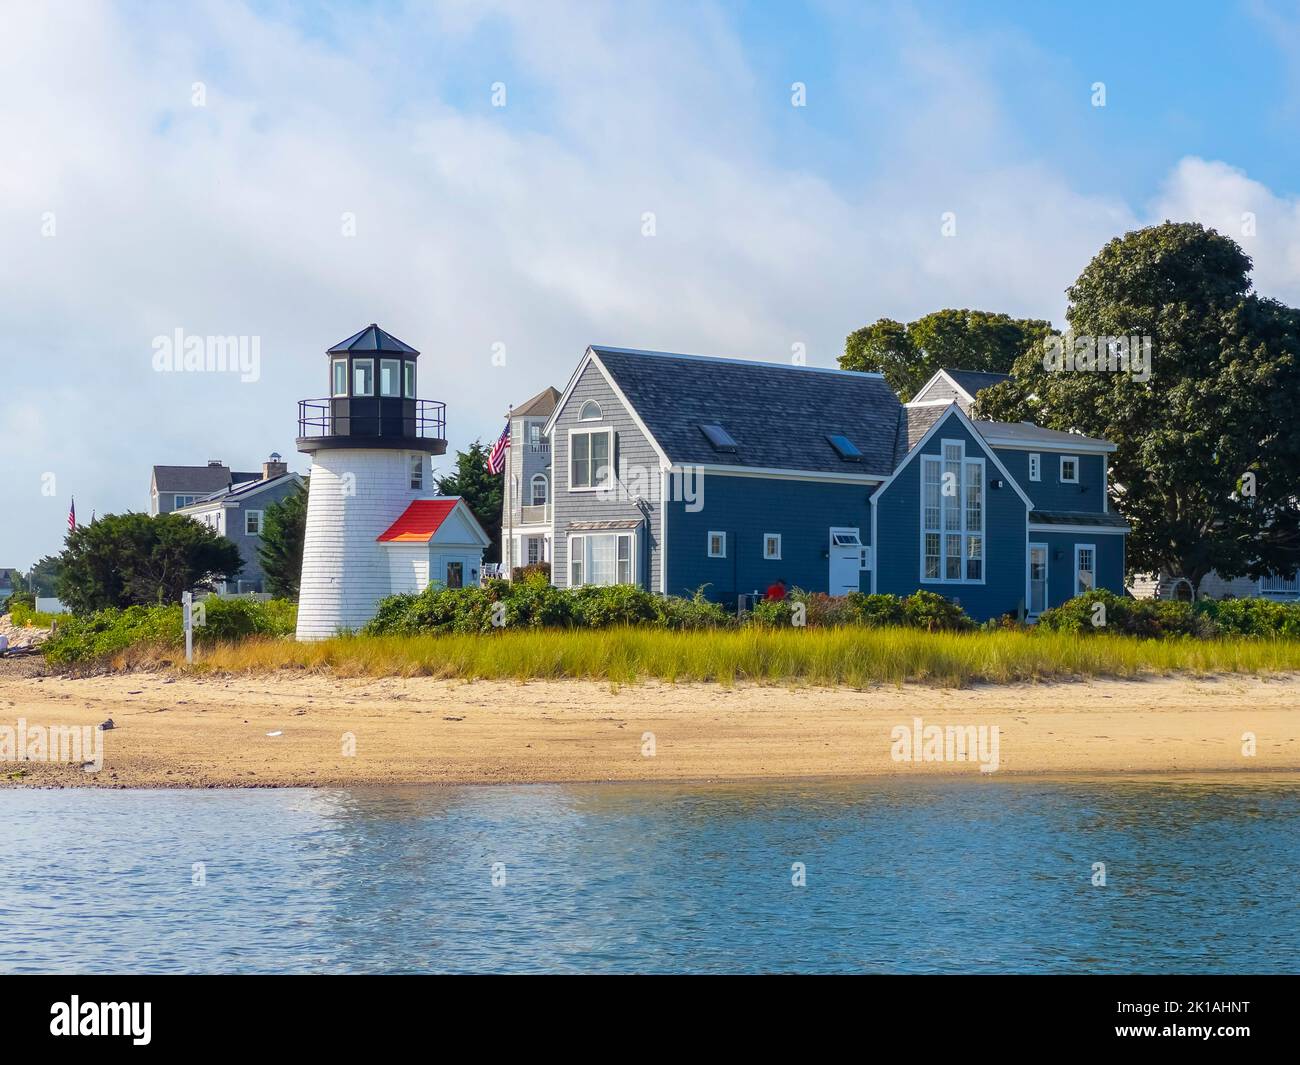 Hyannis Harbor Lighthouse was built in 1849 at Hyannis Harbor in Lewis Bay, village of Hyannis, town of Barnstable, Cape Cod, Massachusetts MA, USA. Stock Photo